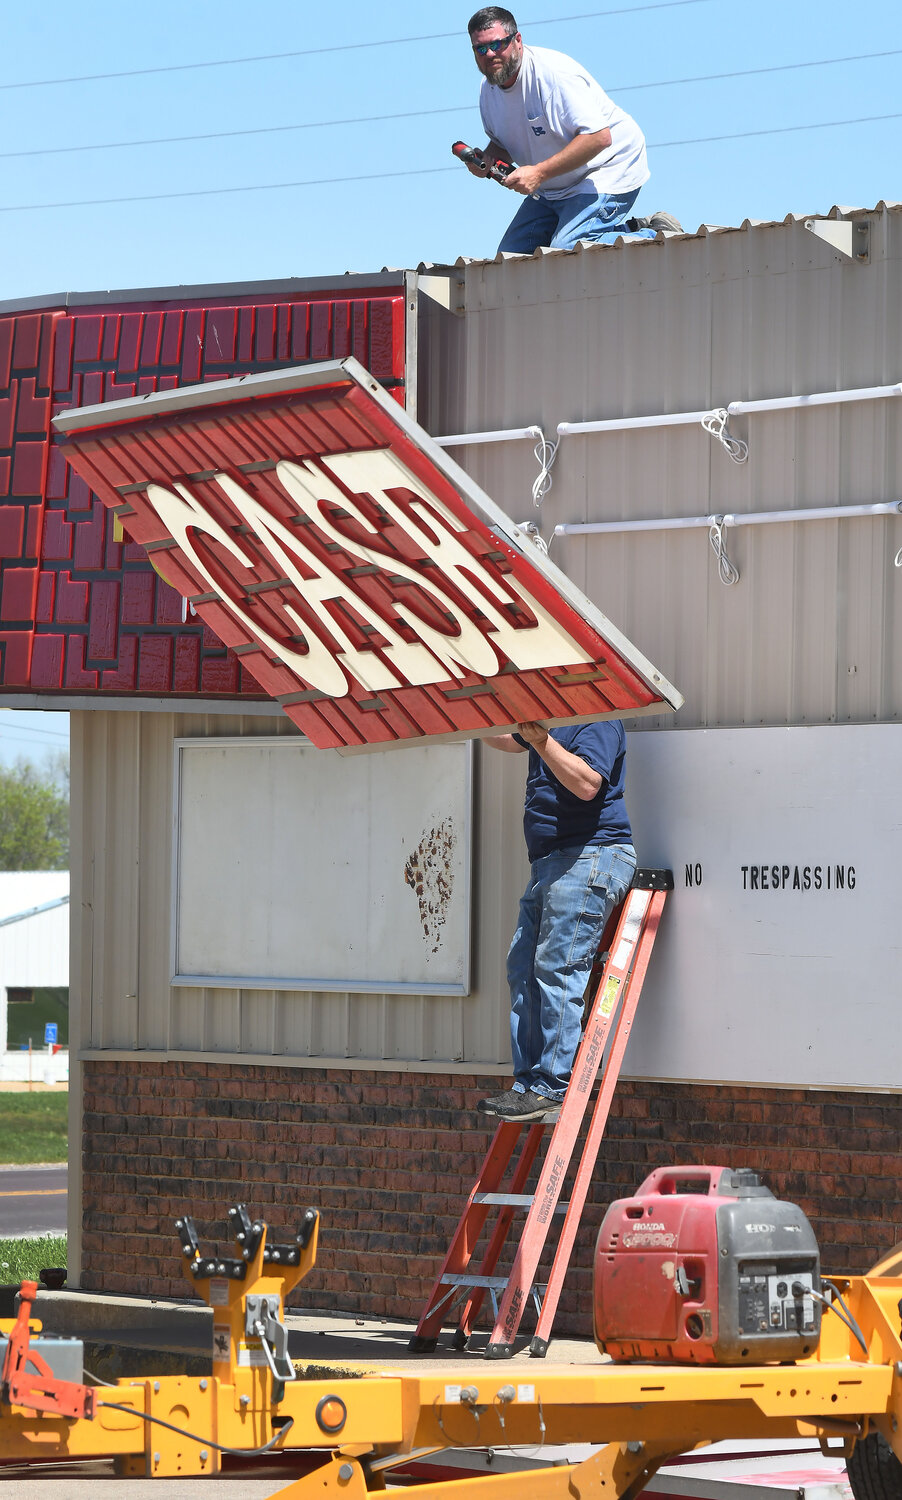 On Tuesday, employees of the Iowa firm Atwood Electric, Inc., remove the Casey’s logos and exterior signs from the site at 508 West Jefferson which opened on Dec. 29, 1984.